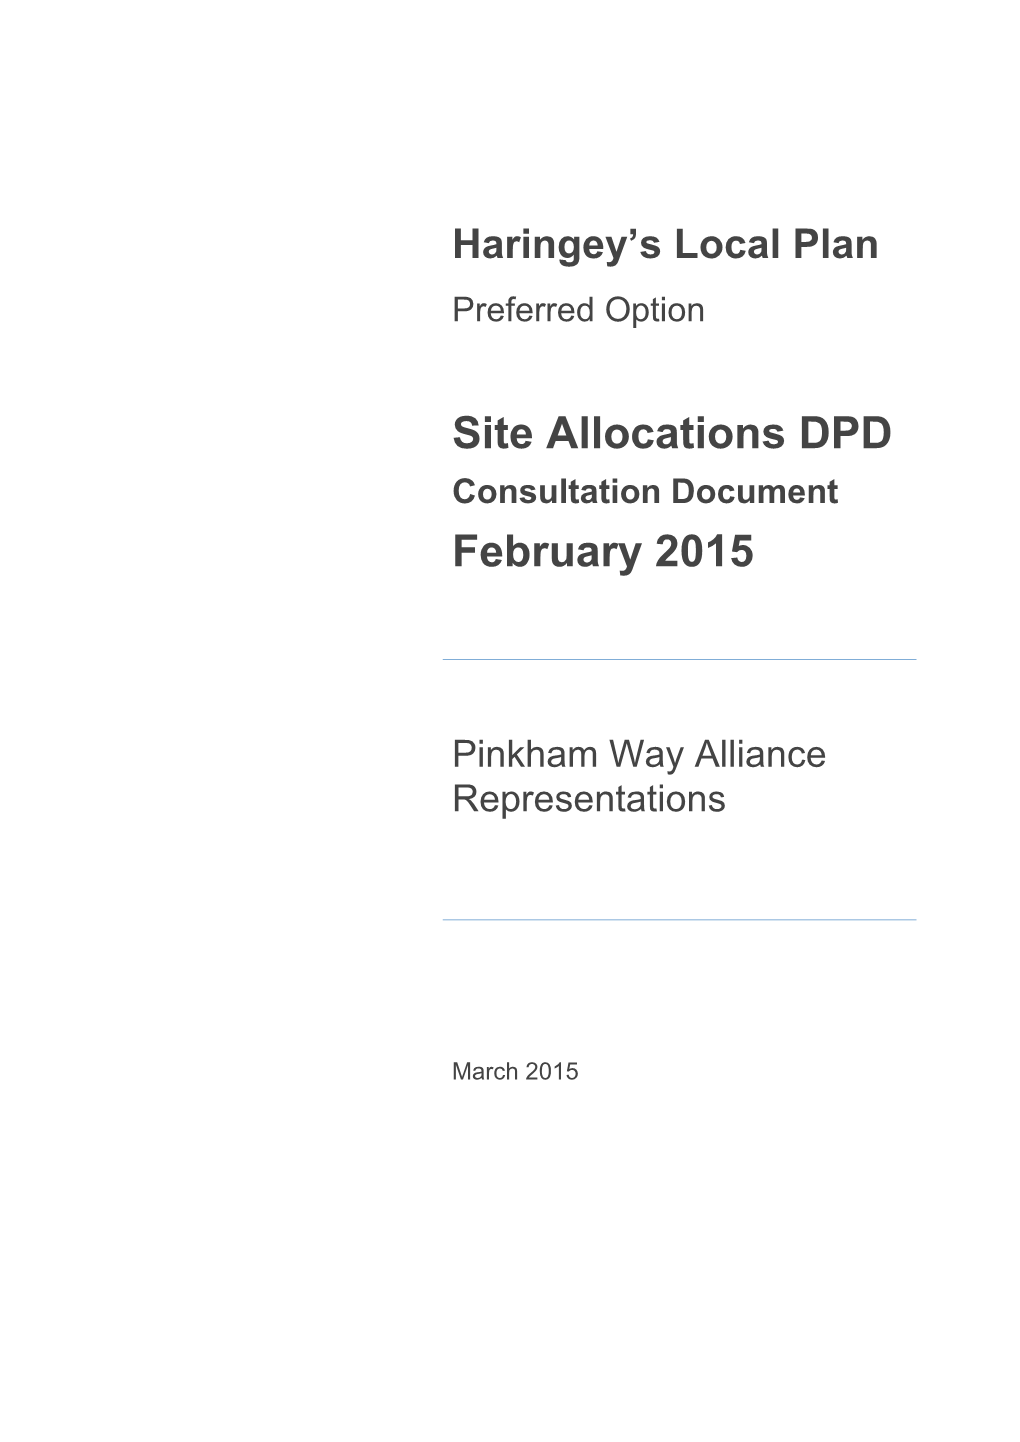 London Borough of Haringey Due to Pressures from Development